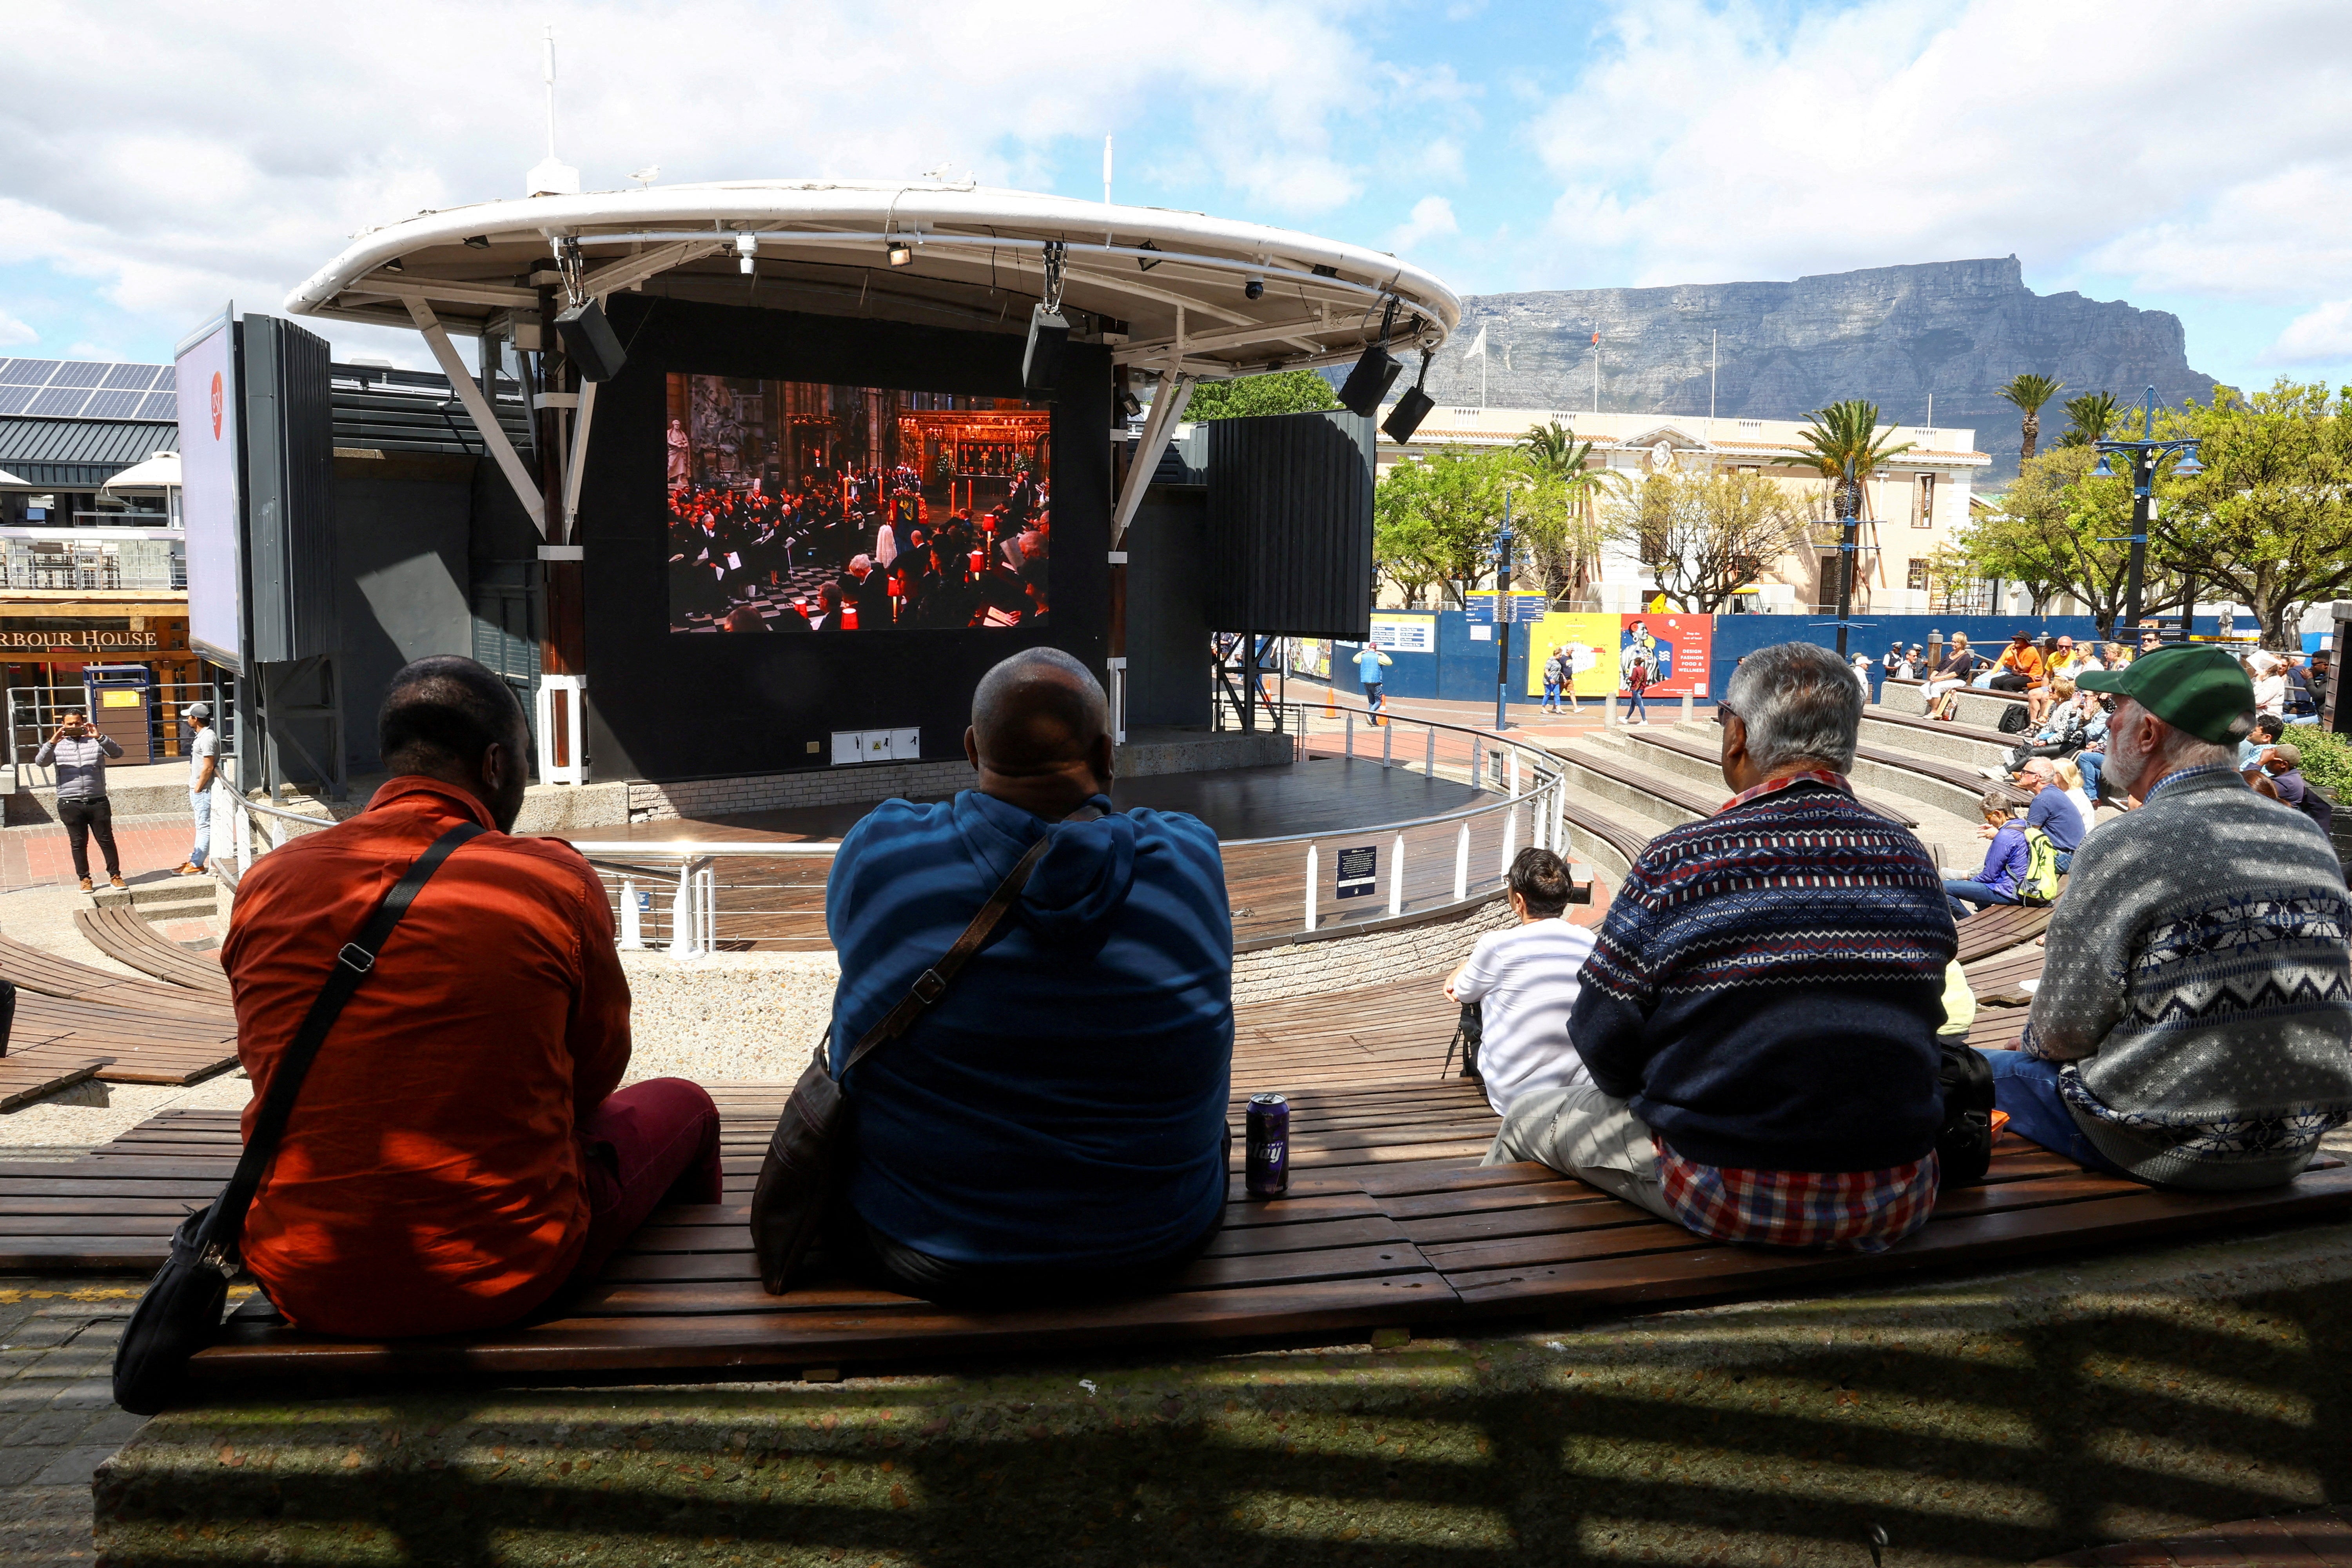 Spectators watch the service on a big screen in the V&A Waterfront in Cape Town, South Africa